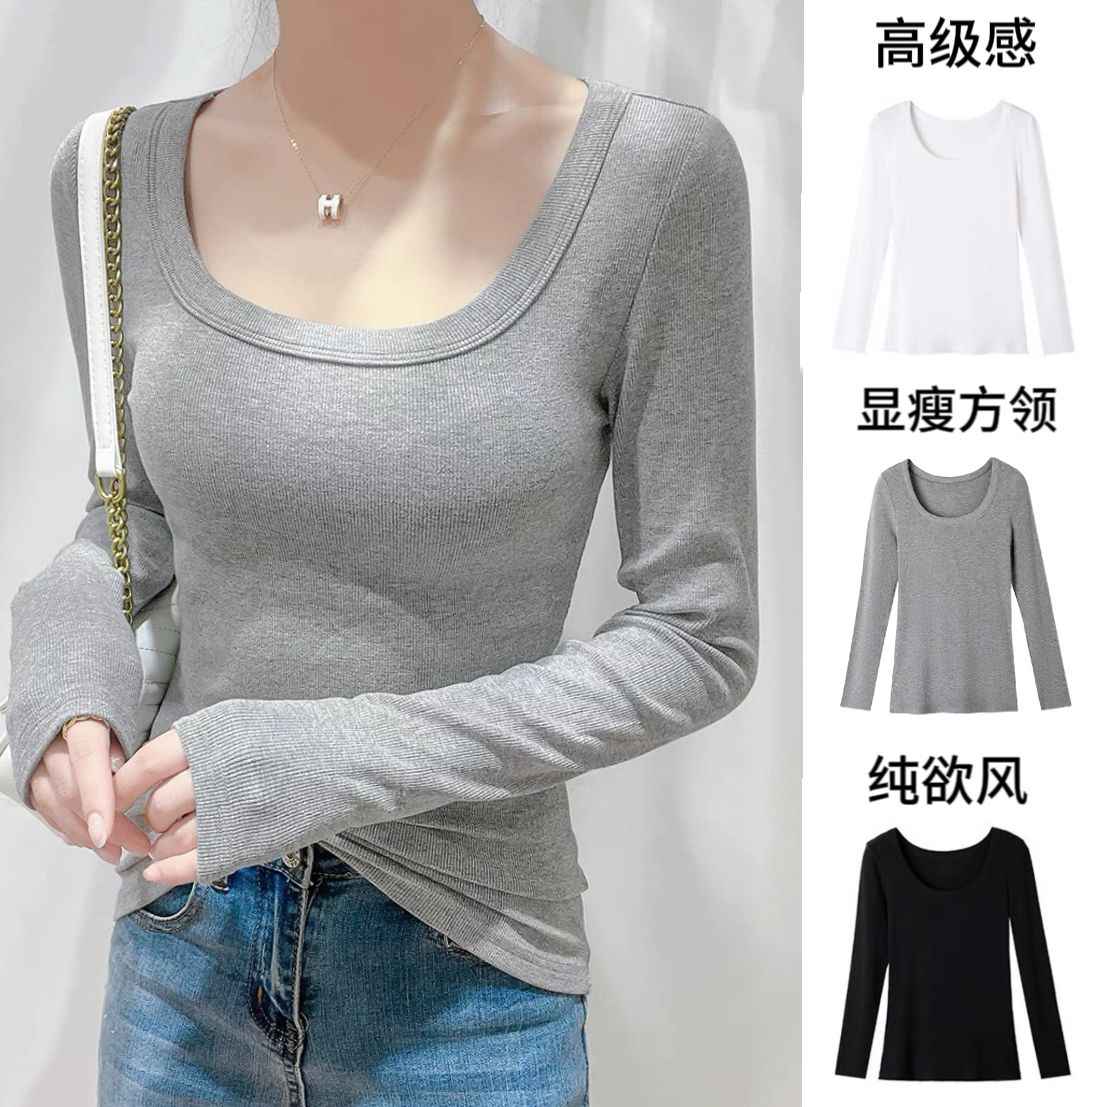 square collar thread t-shirt long sleeve bottoming shirt for women spring and autumn western style slim fit slim bottoming top high class elegant socialite